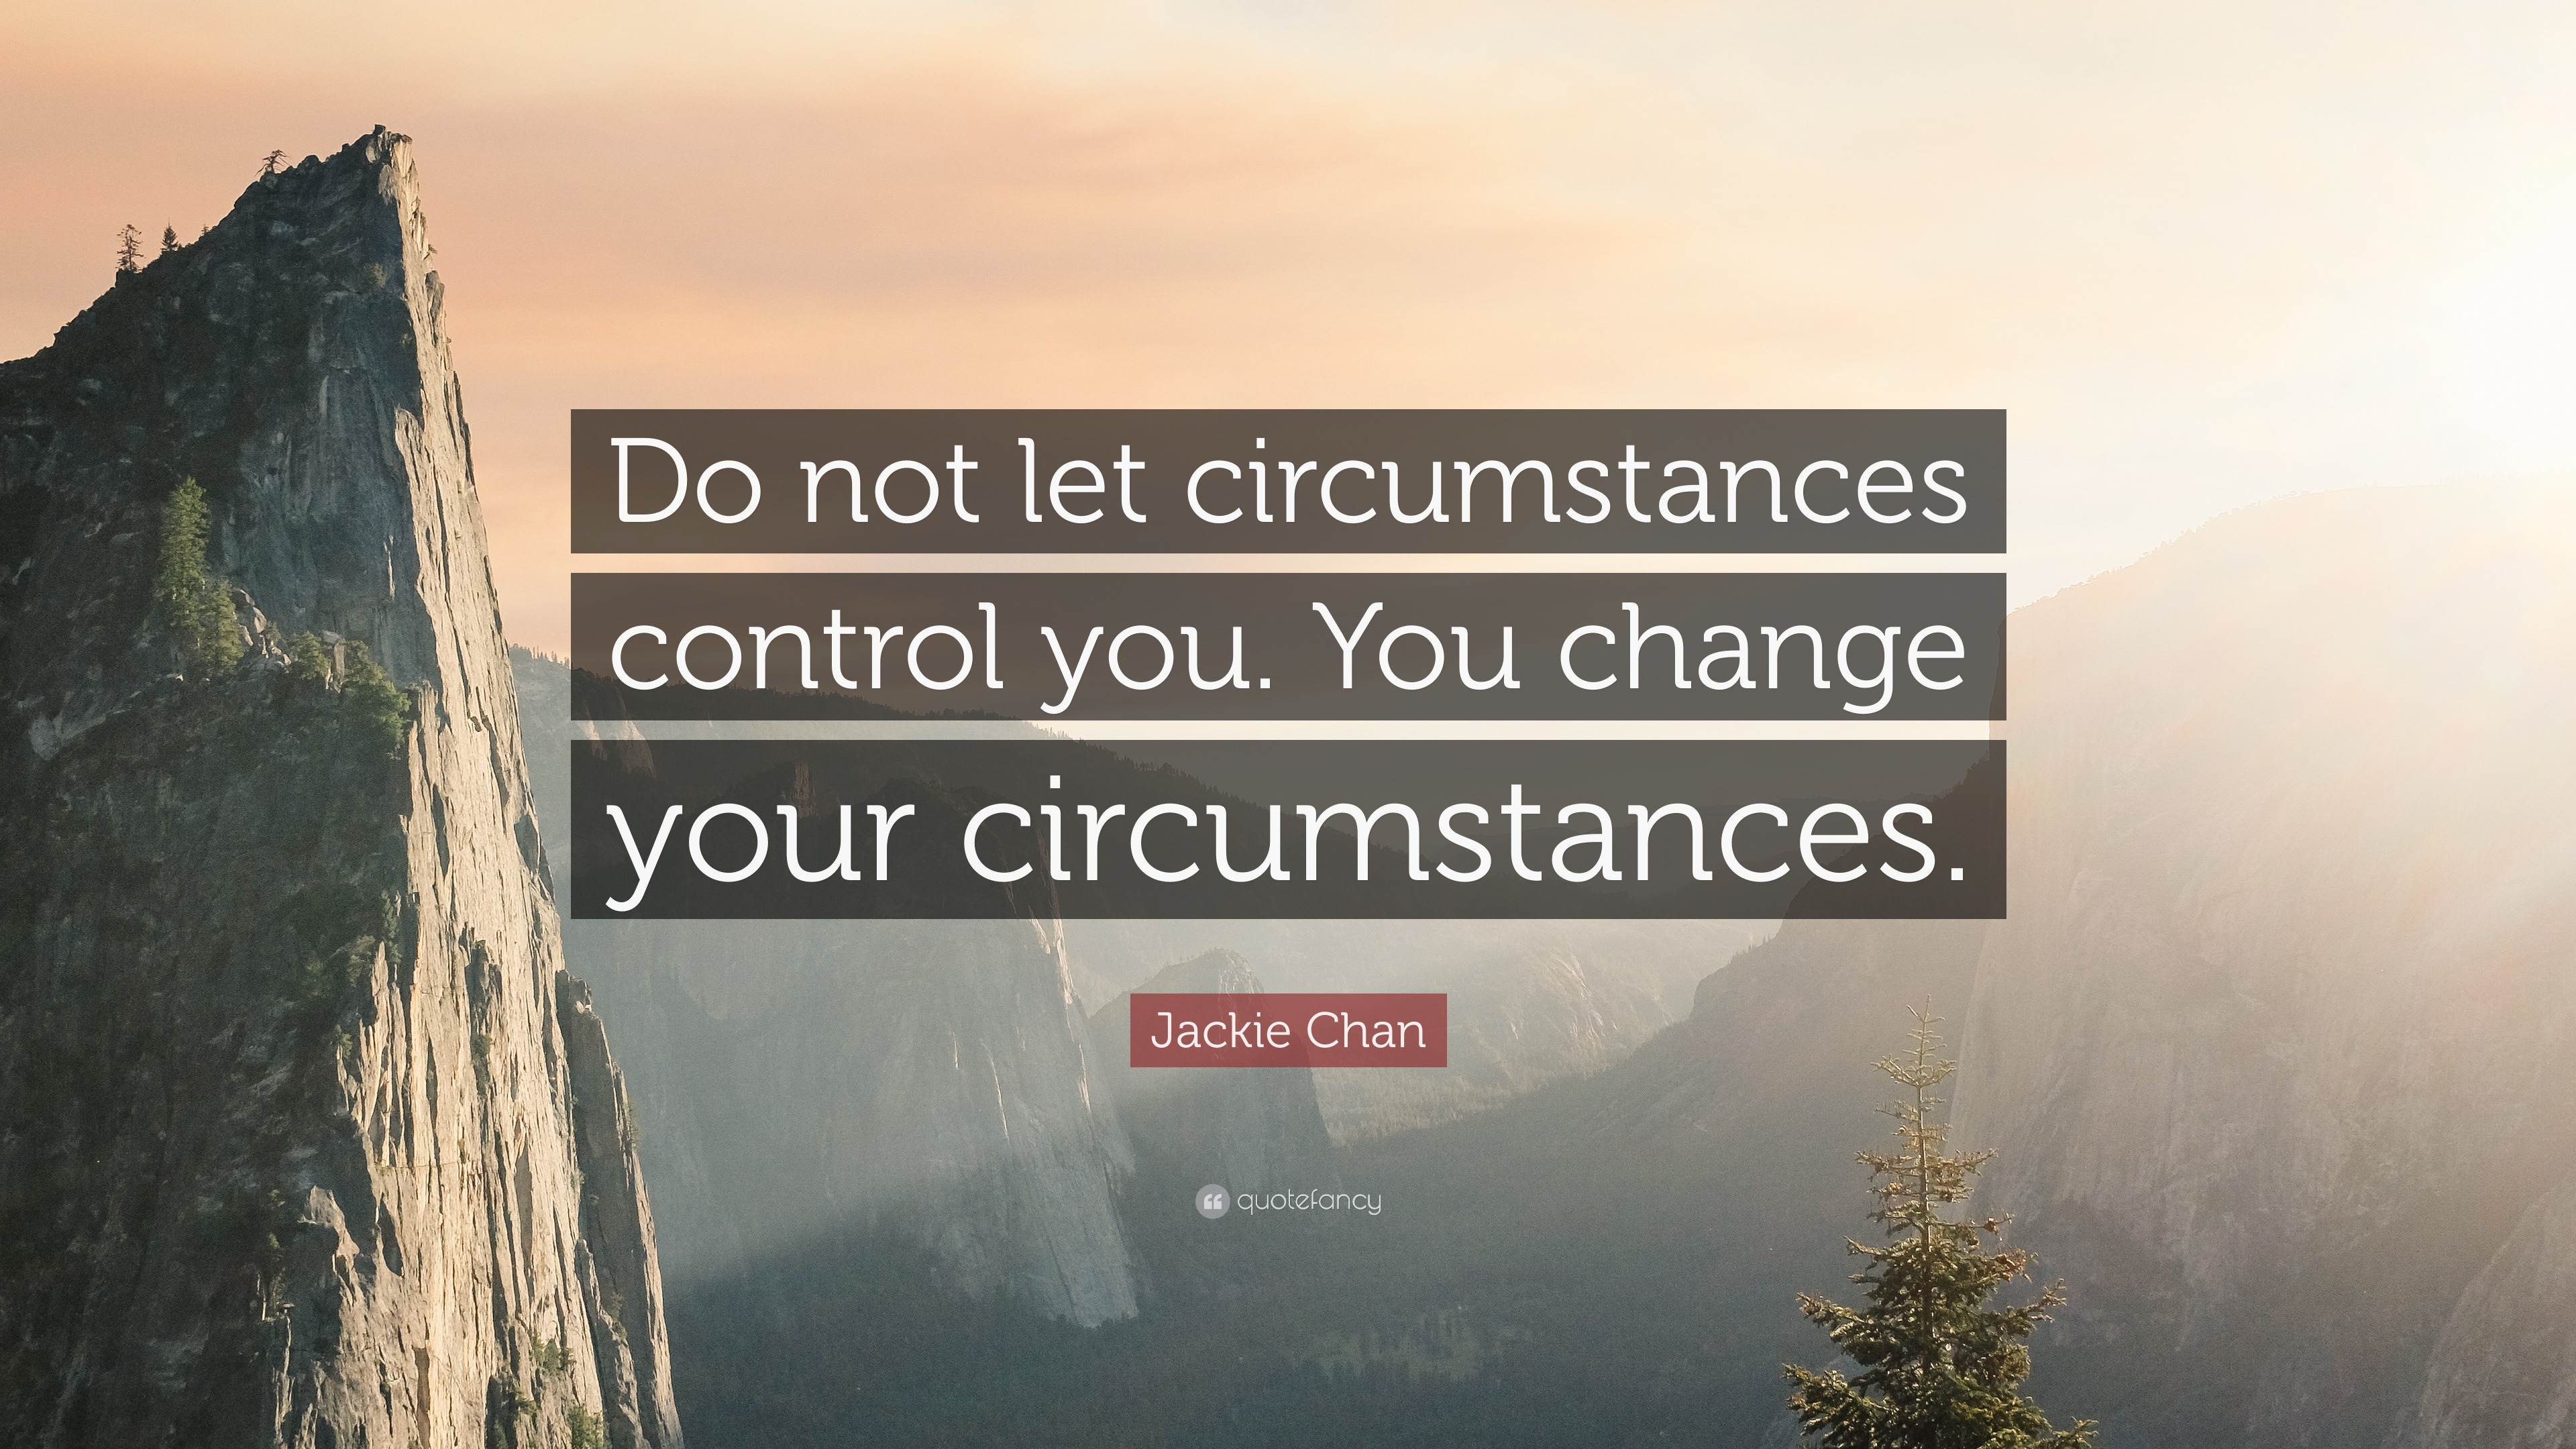 Jackie Chan Quote: “Do not let circumstances control you. You change